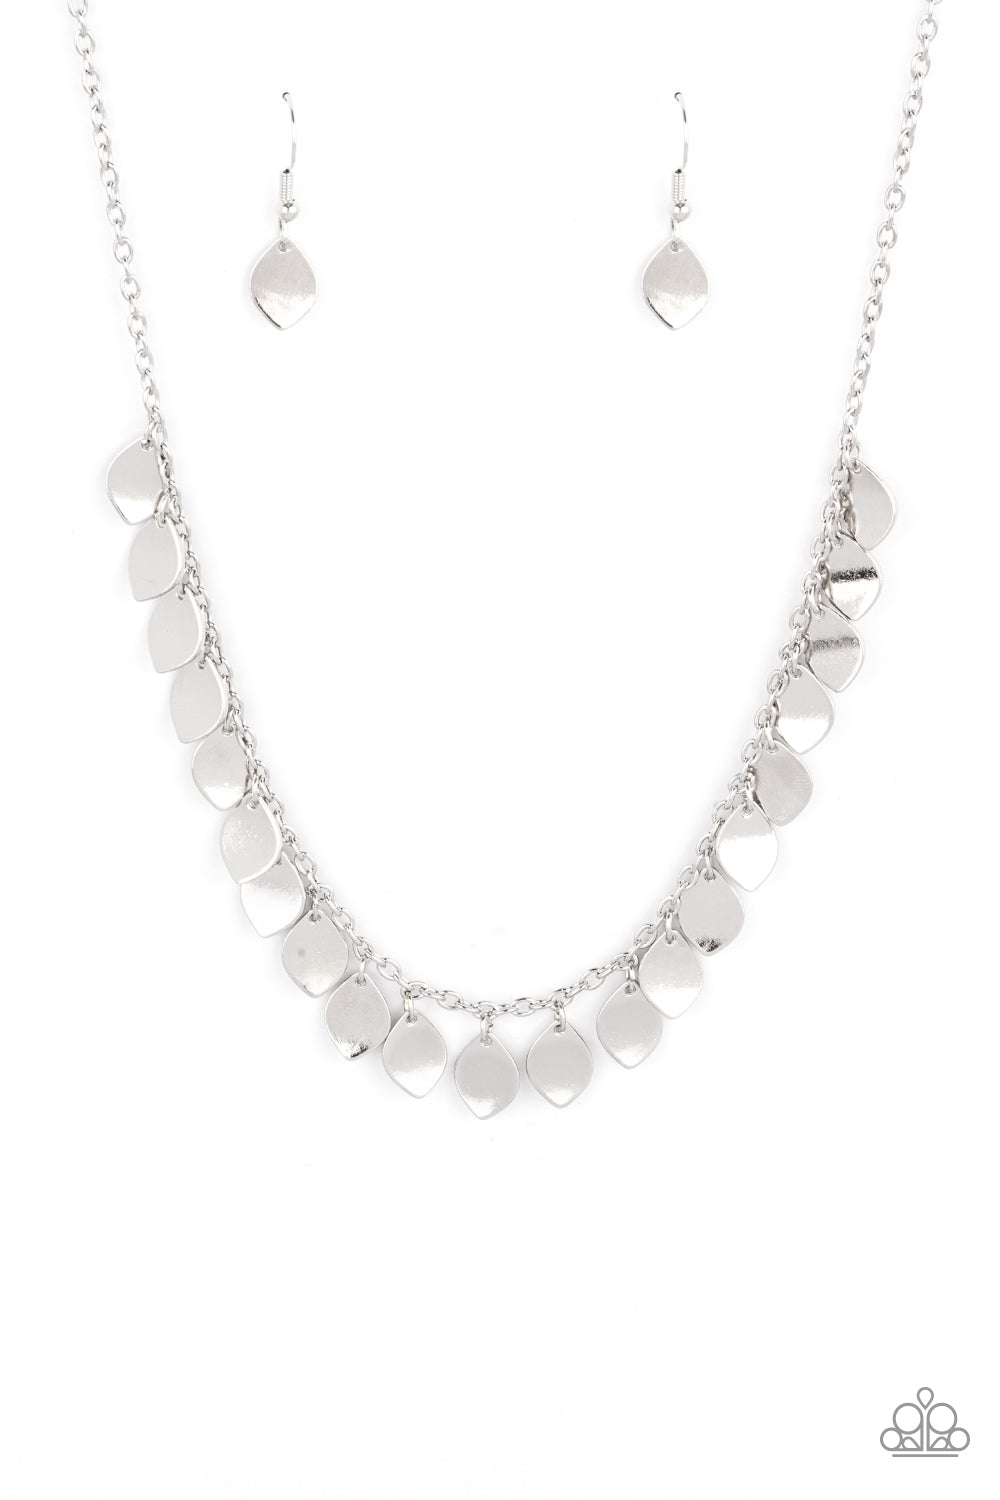 Dainty DISCovery - Silver necklace 2180